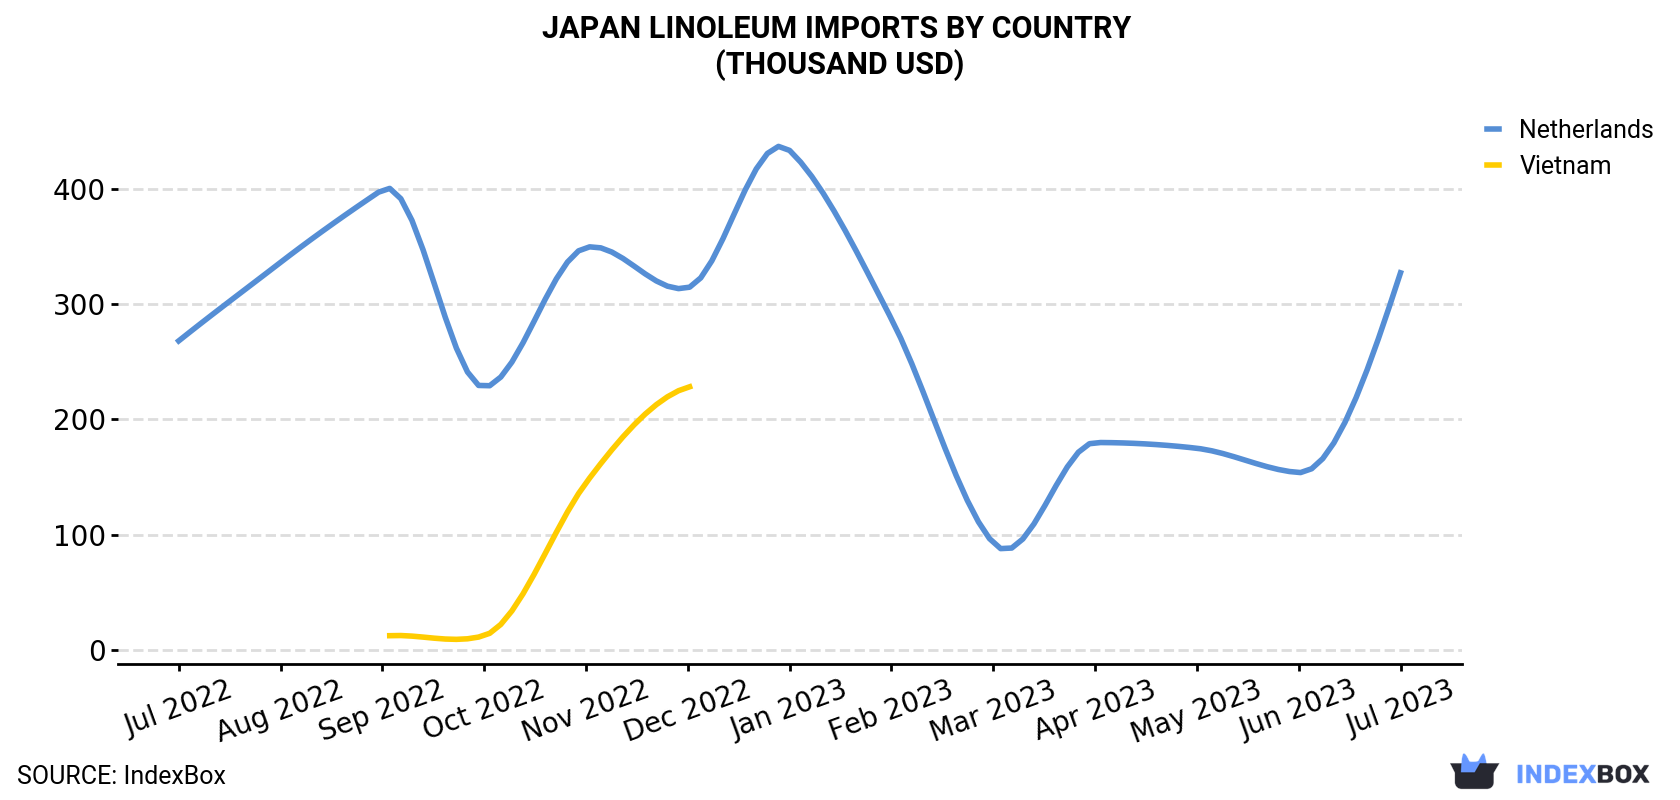 Japan Linoleum Imports By Country (Thousand USD)